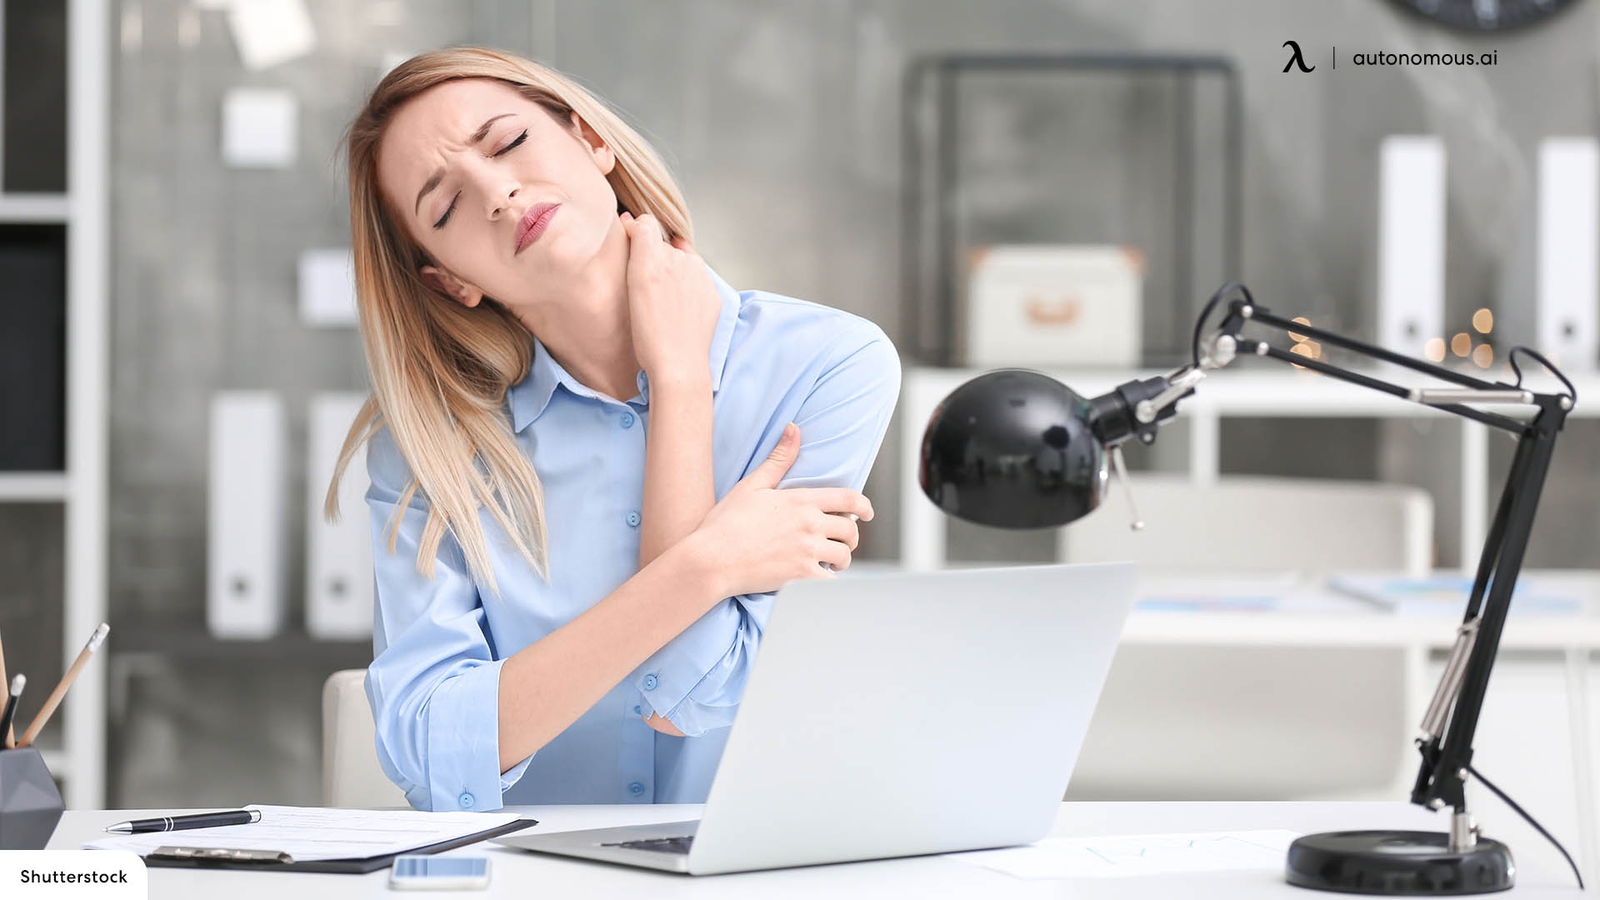 Why Do You Suffer Neck Pain Sitting At Desks?